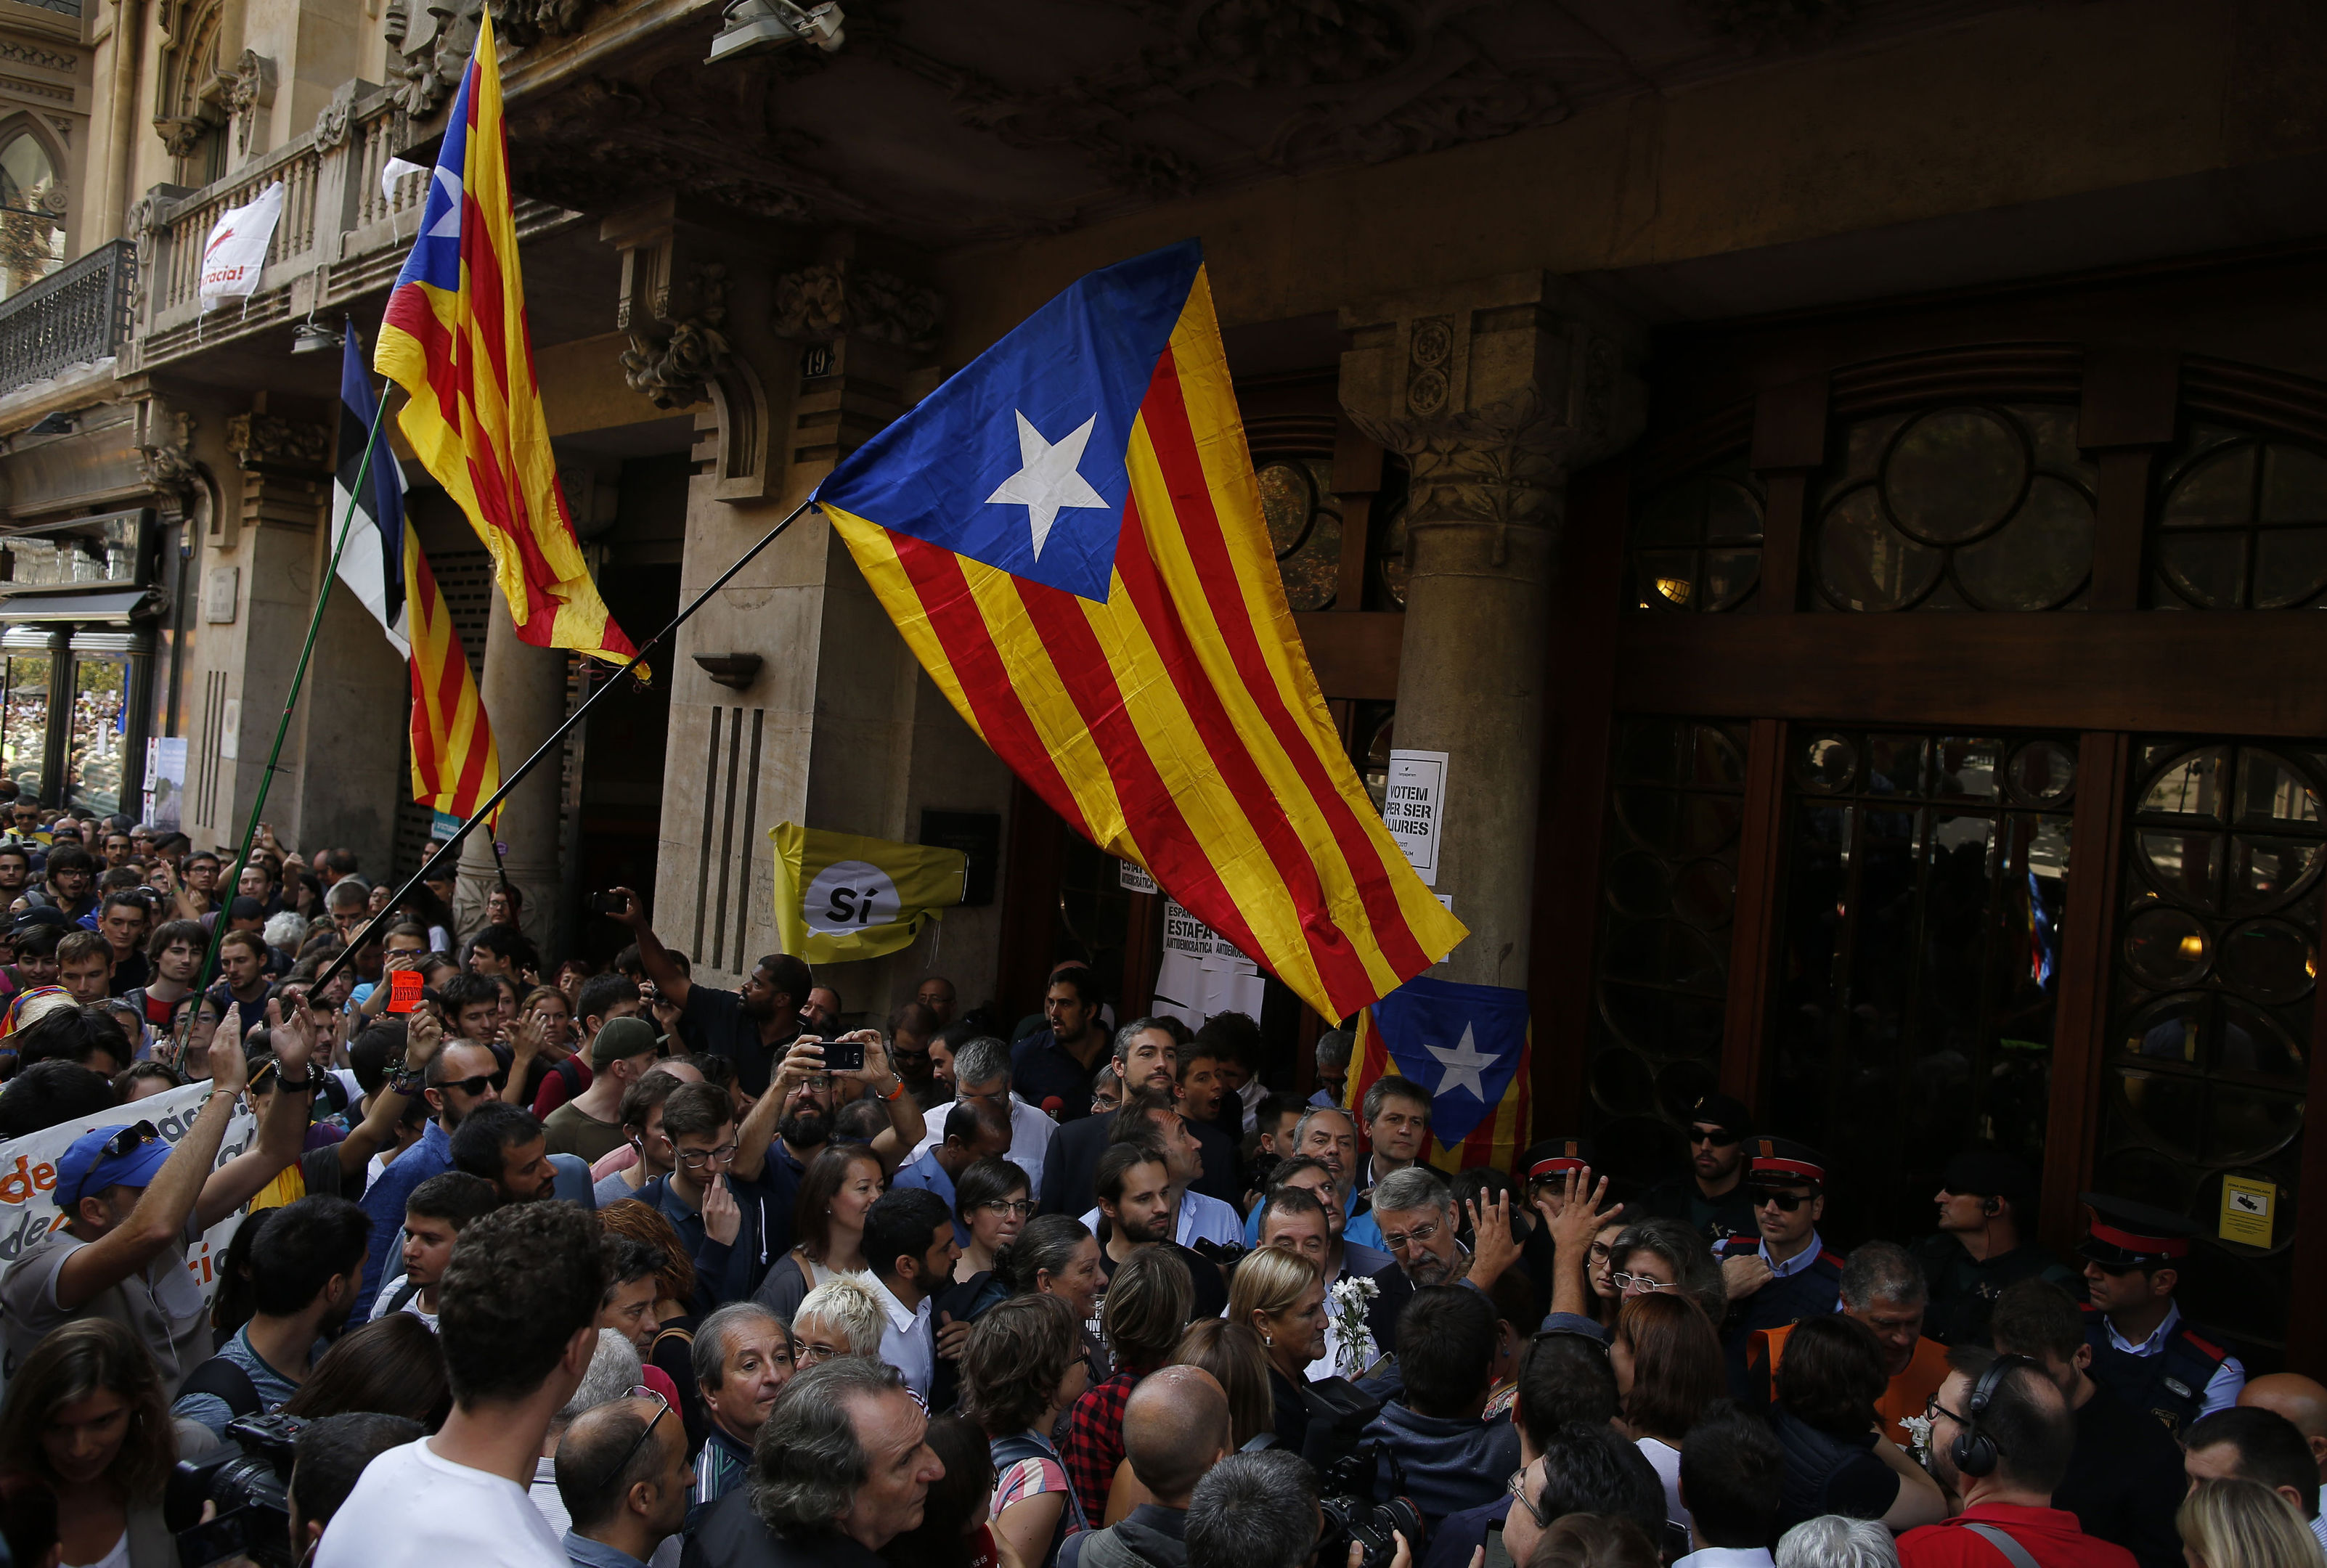 Pro-independence protestors hold up "esteladas", or independence flags, as they gather outside the headquarters of the region's department of economic affairs in Barcelona (AP Photo/Manu Fernandez)